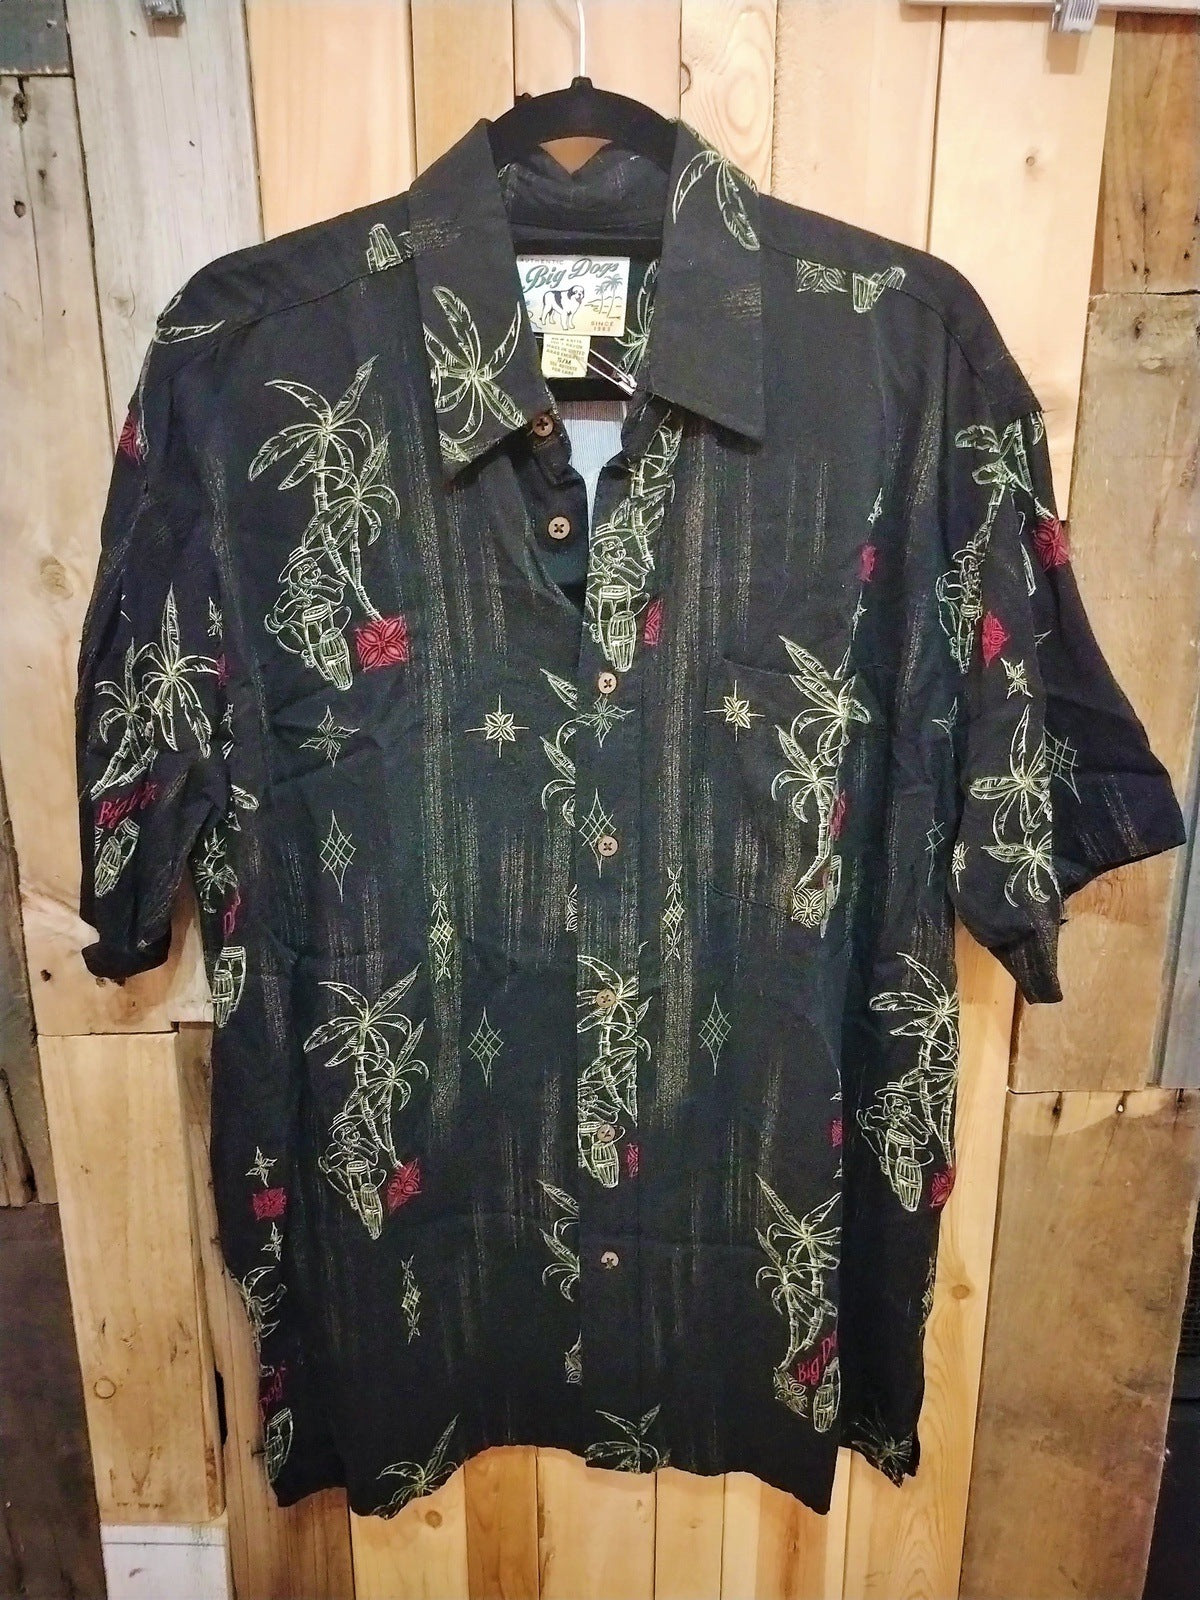 Big Dogs Men's Tropical Style Short Sleeve Shirt Tagged S/M Measures as XL